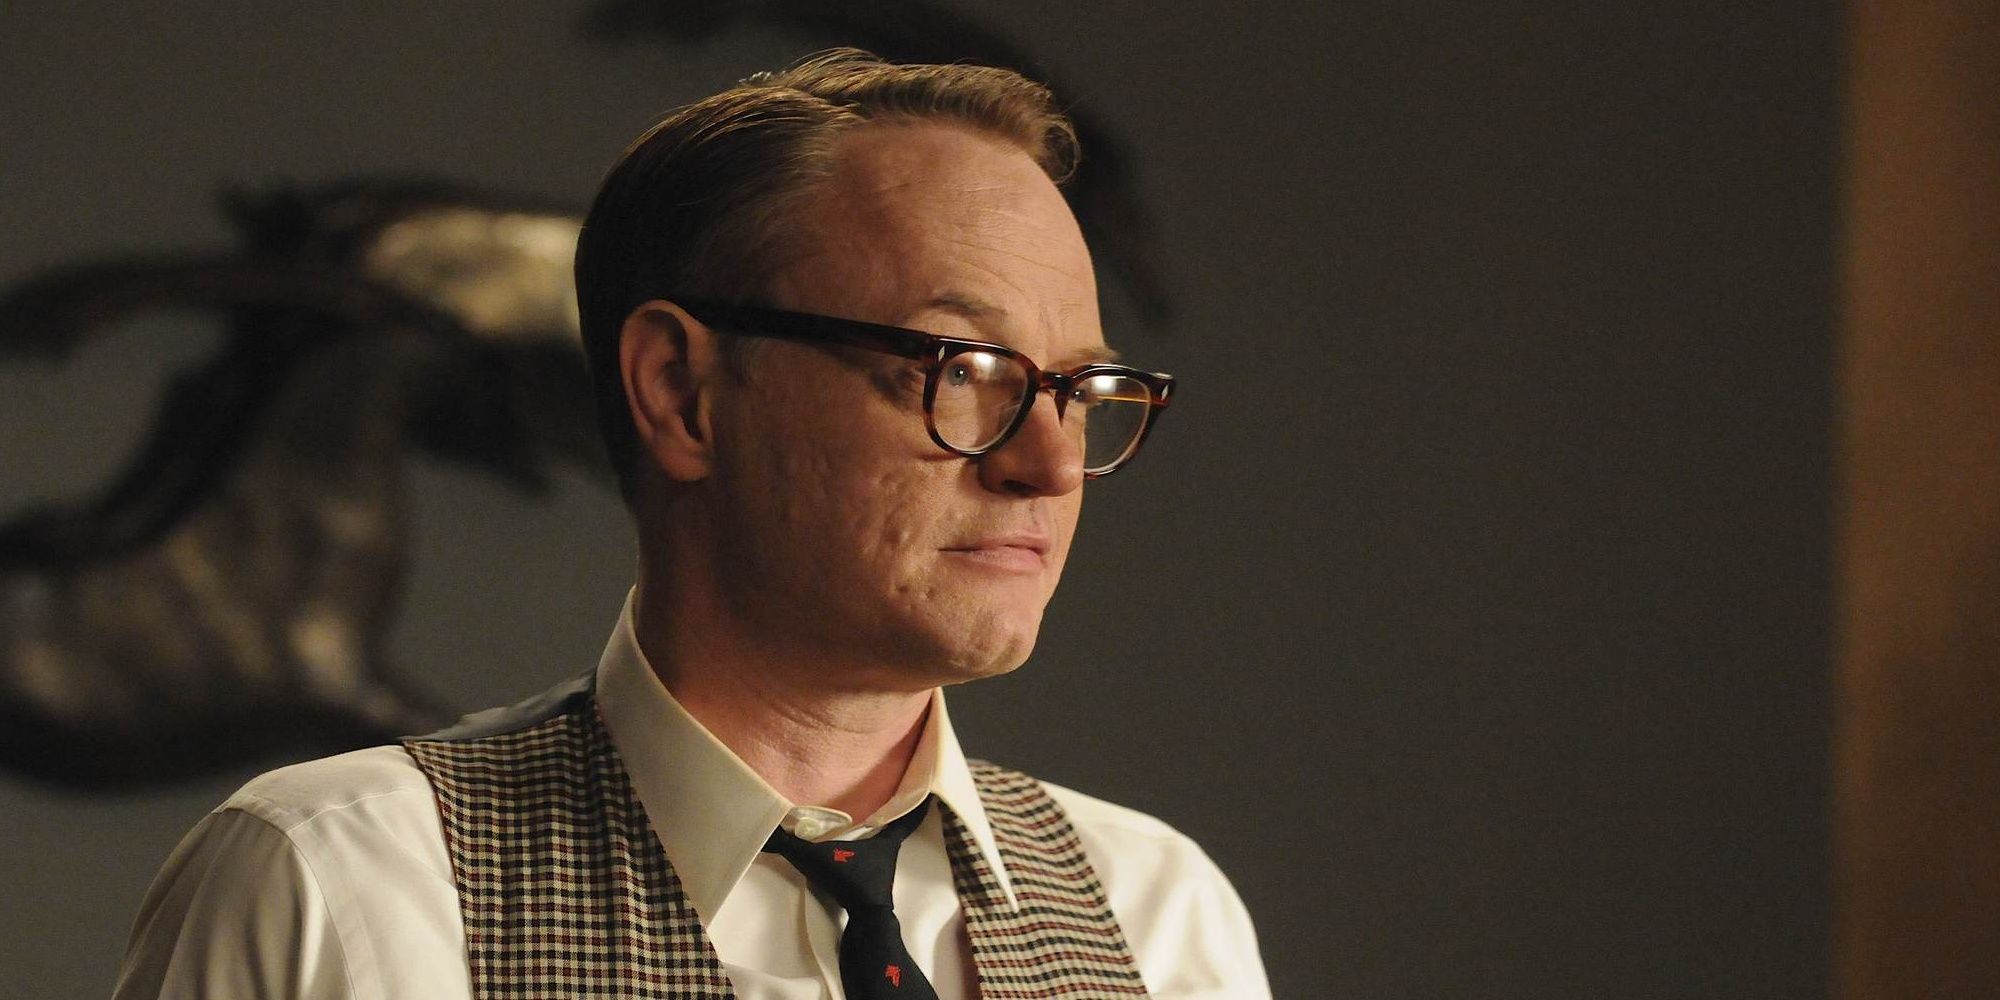 Mad Men The 10 Most Heartbreaking Episodes According To Reddit